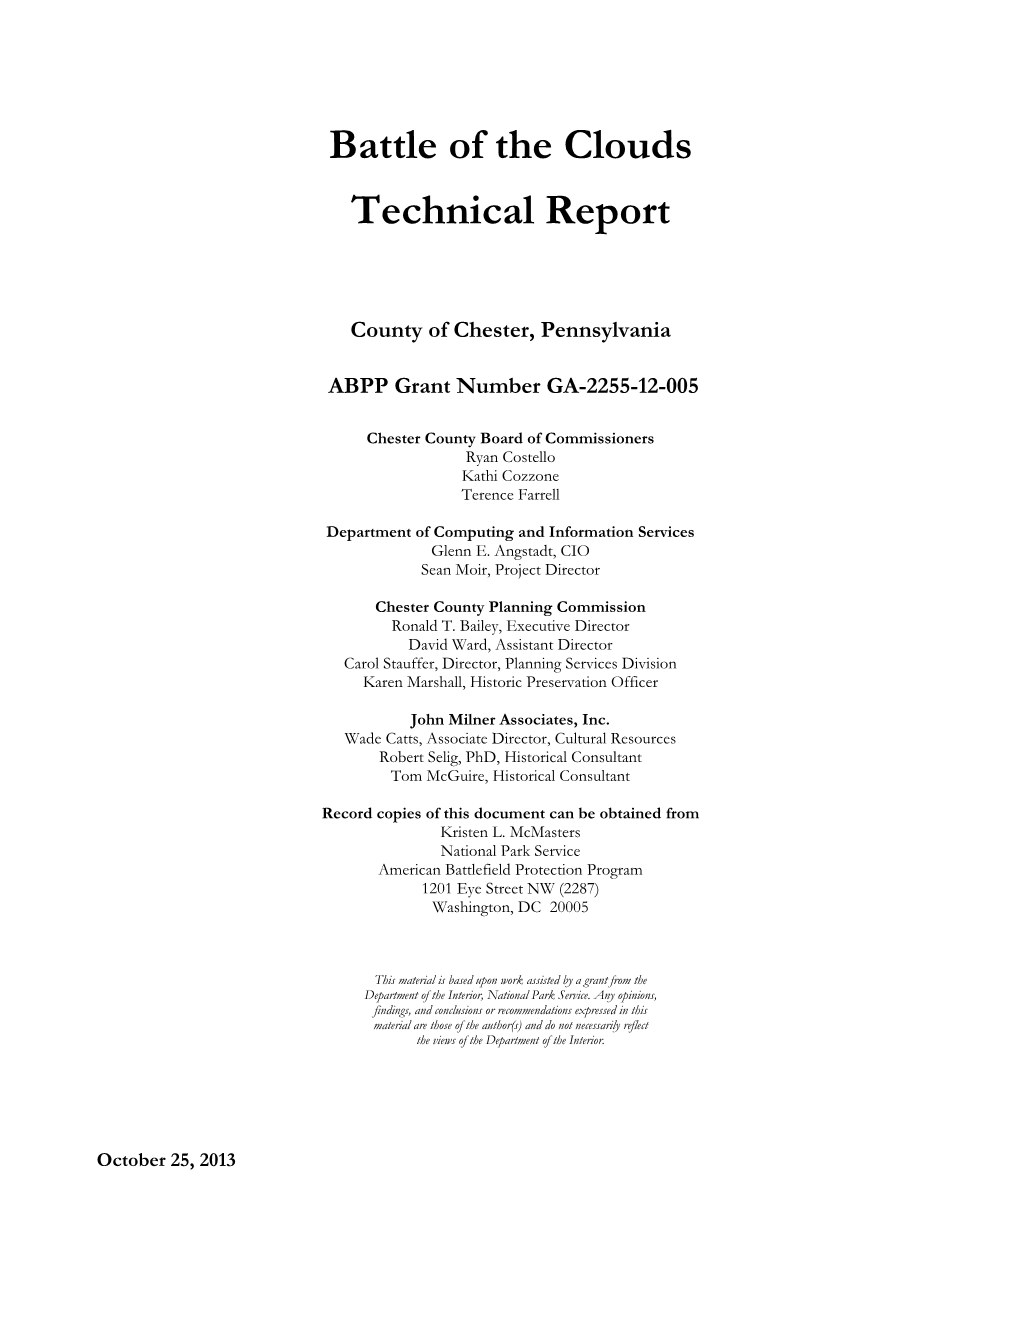 Battle of the Clouds Technical Report